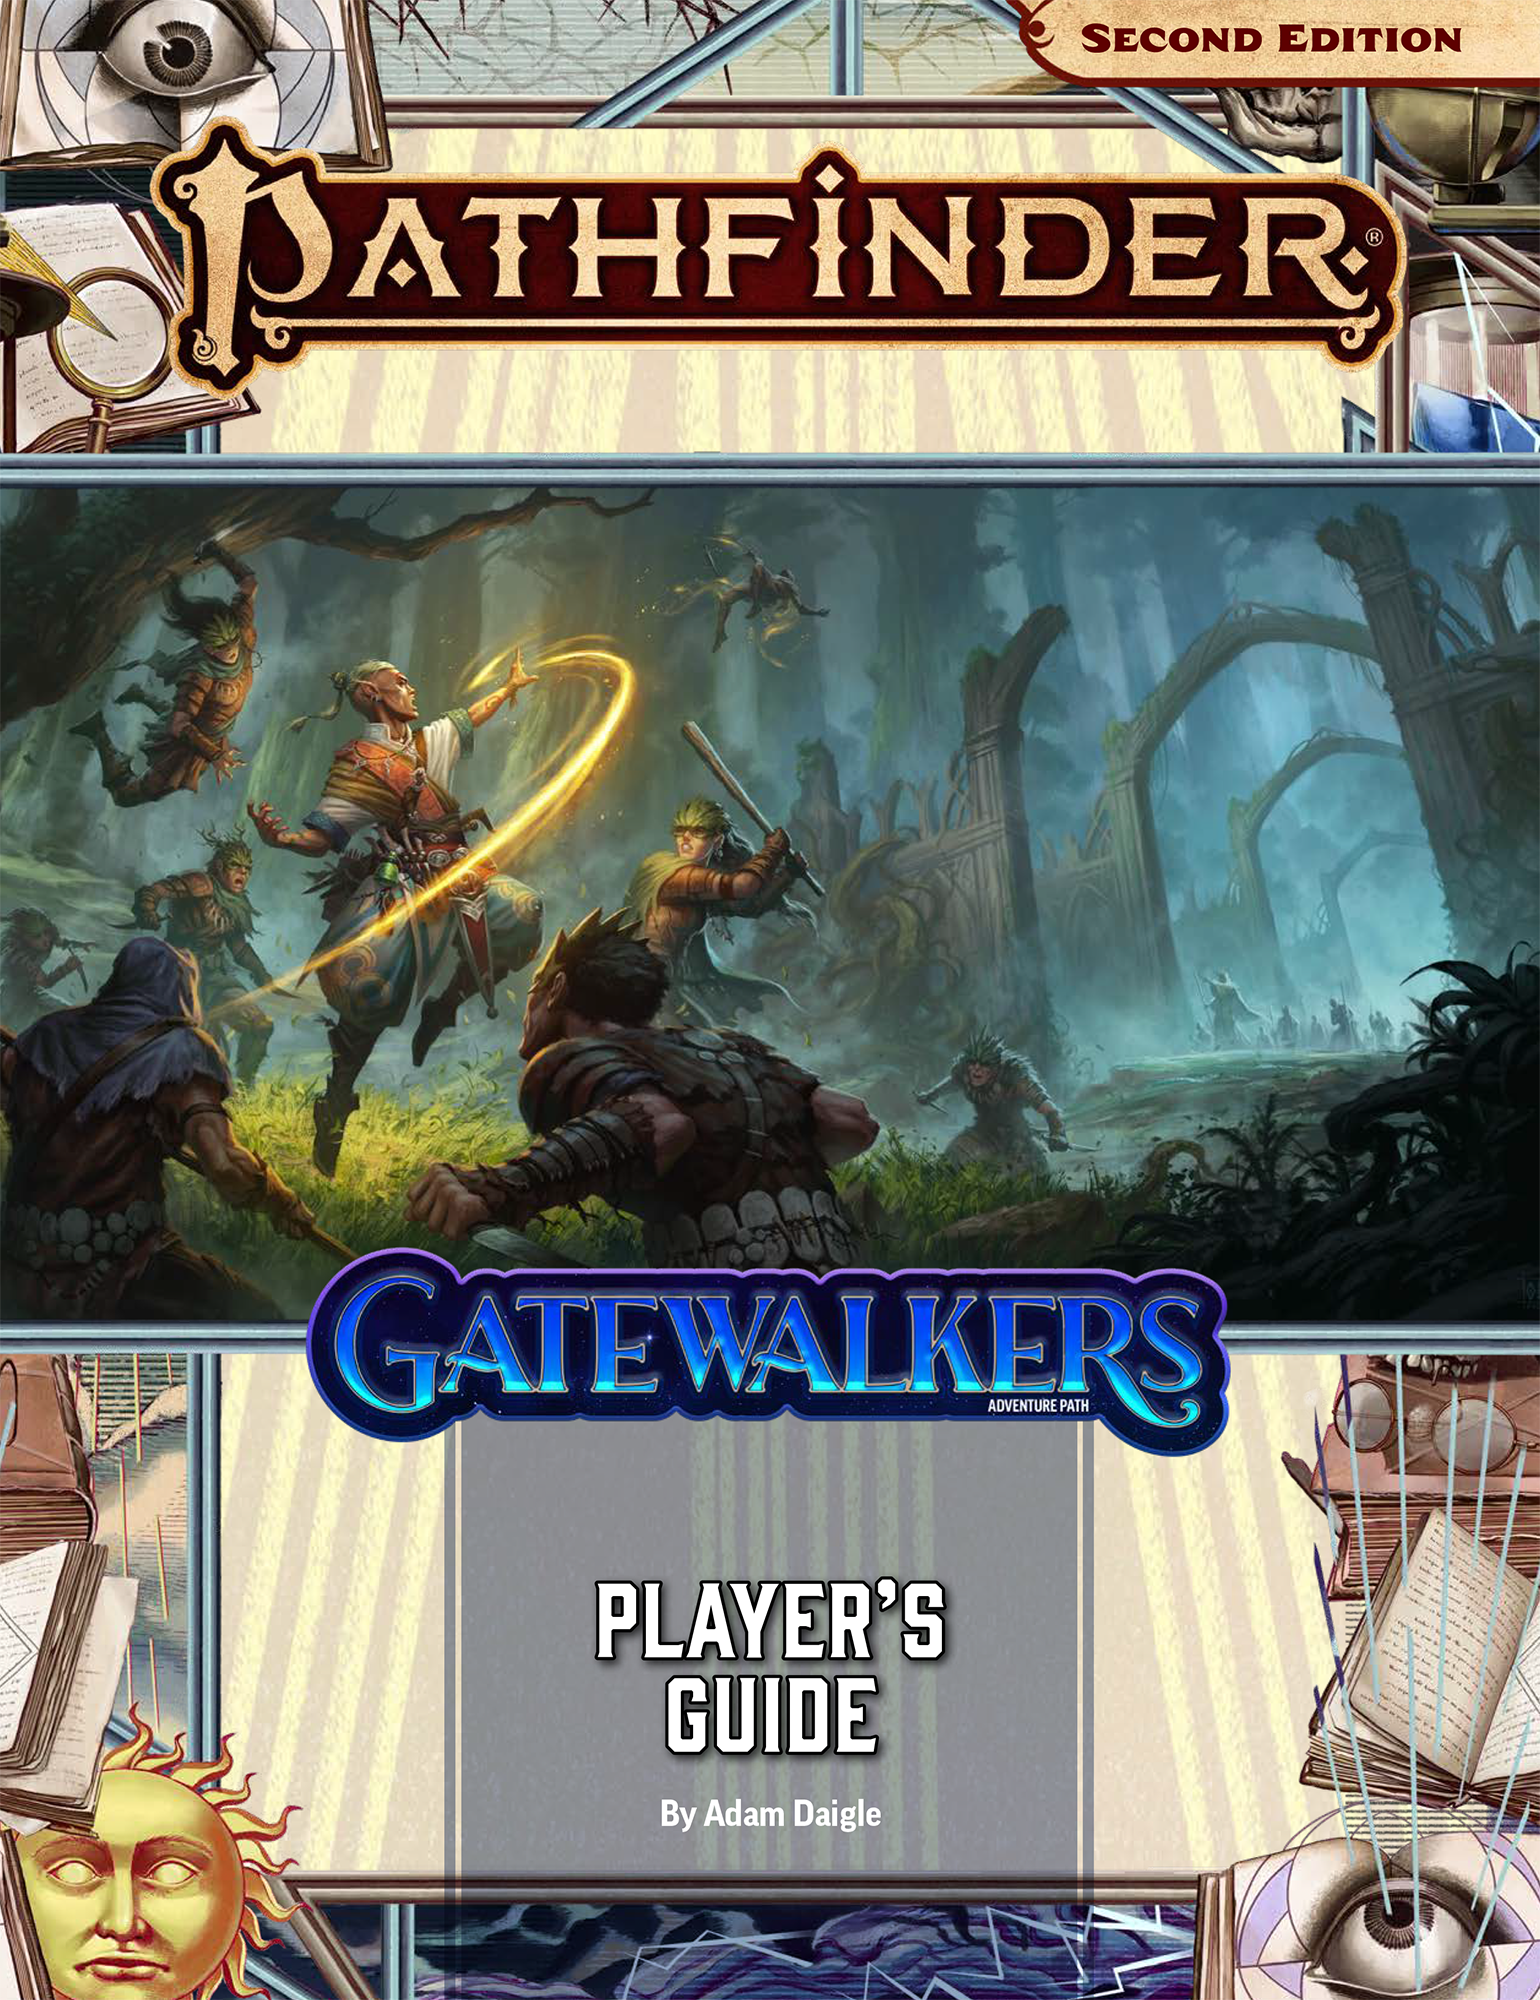 Pathfinder Second Edition Gatewalkers Player's Guide